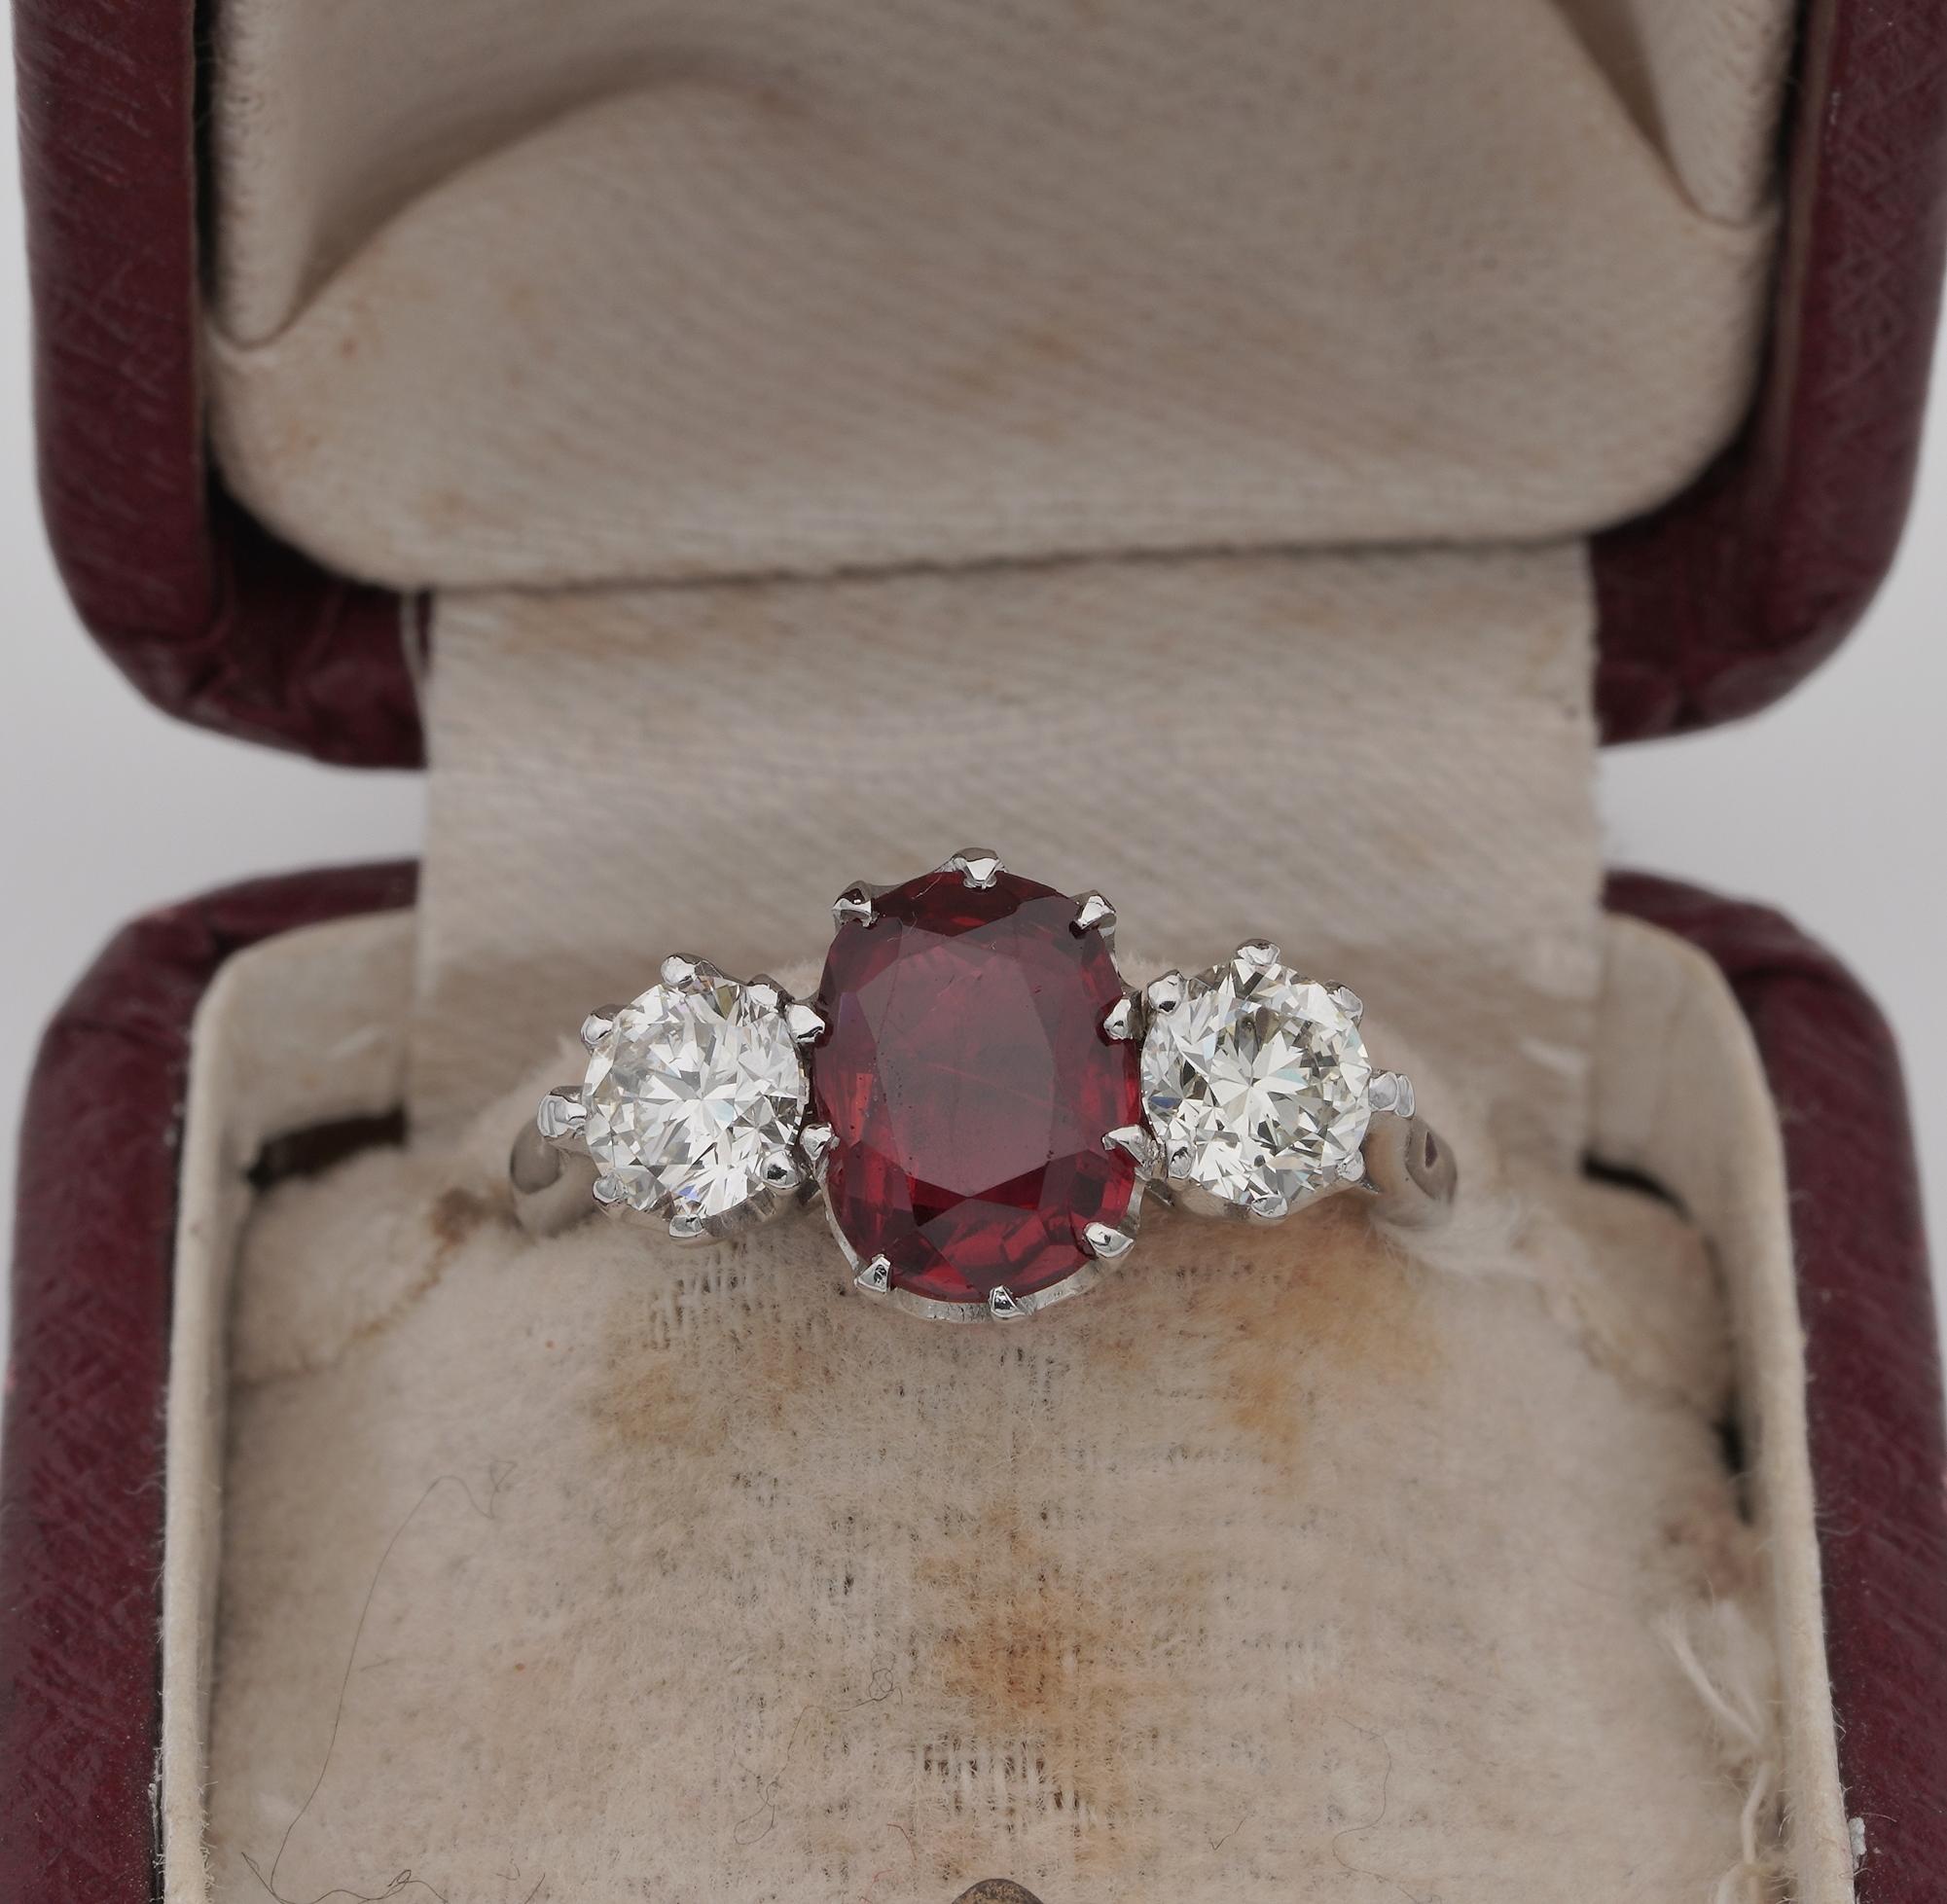 Estate
Classy yet meaningful trilogy style suitable for engagement or anniversary to treasure for life, boasting three beautiful earth mined gemstones
The Spinel is estimated on mounting 1.90 Ct facing up with great impact measuring measuring 8.7